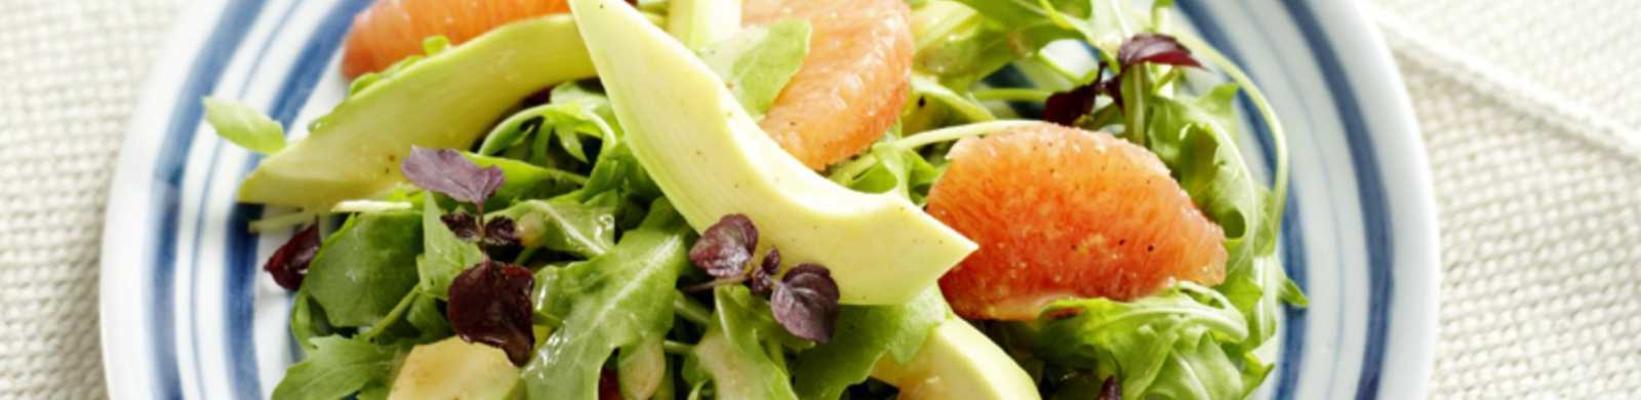 salad with avocado and red grapefruit